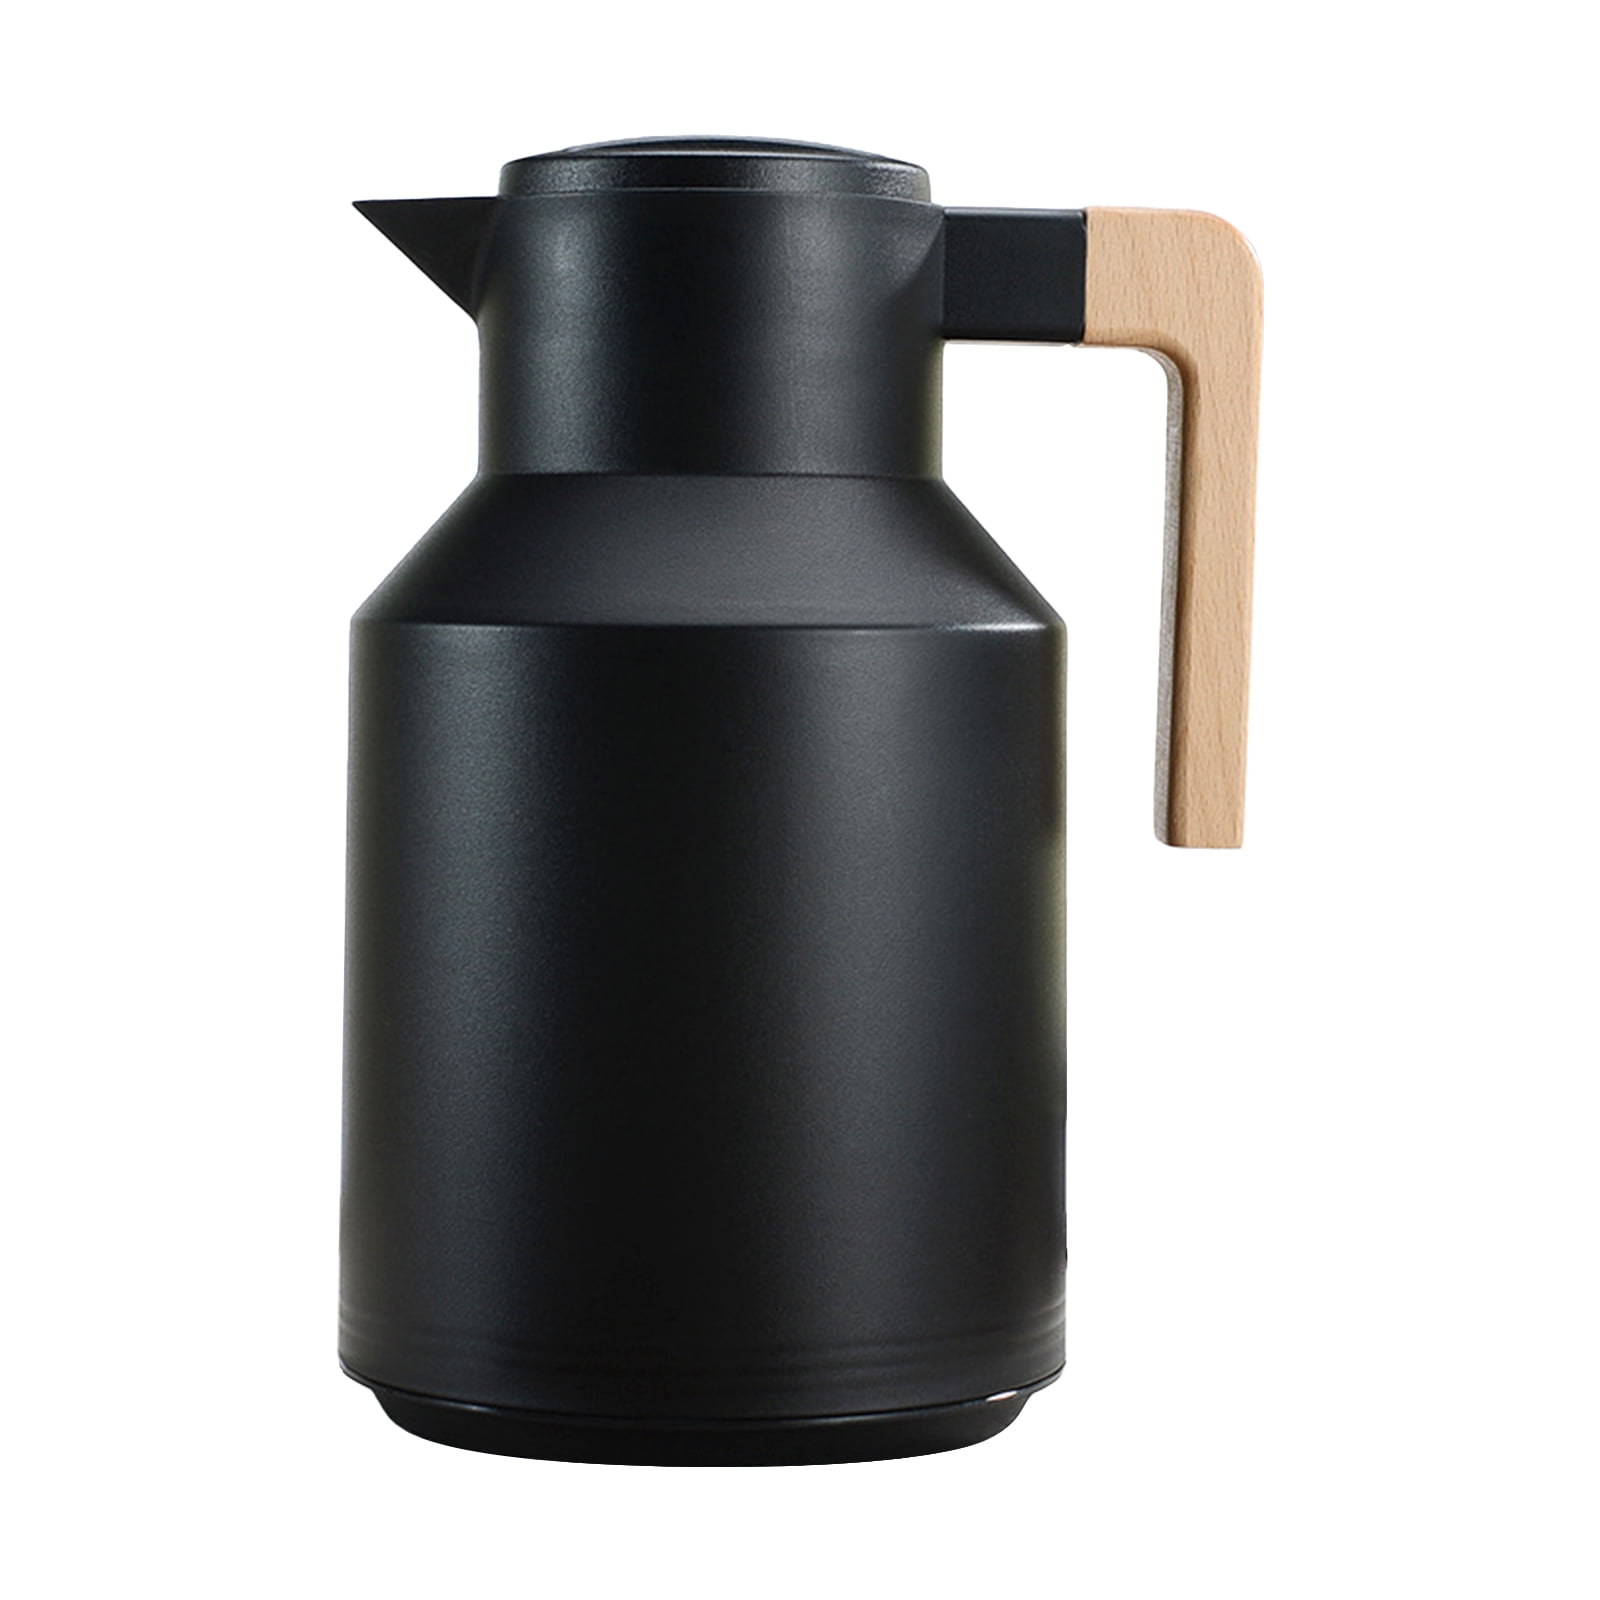 5ALL Stainless Steel Thermos Double Walled Vacuum Insulated Thermal Jug Thick Stainless Steel Coffee Pot Leak Proof and Heat Cold Retention for Coffee Juice Milk Tea Beverages 